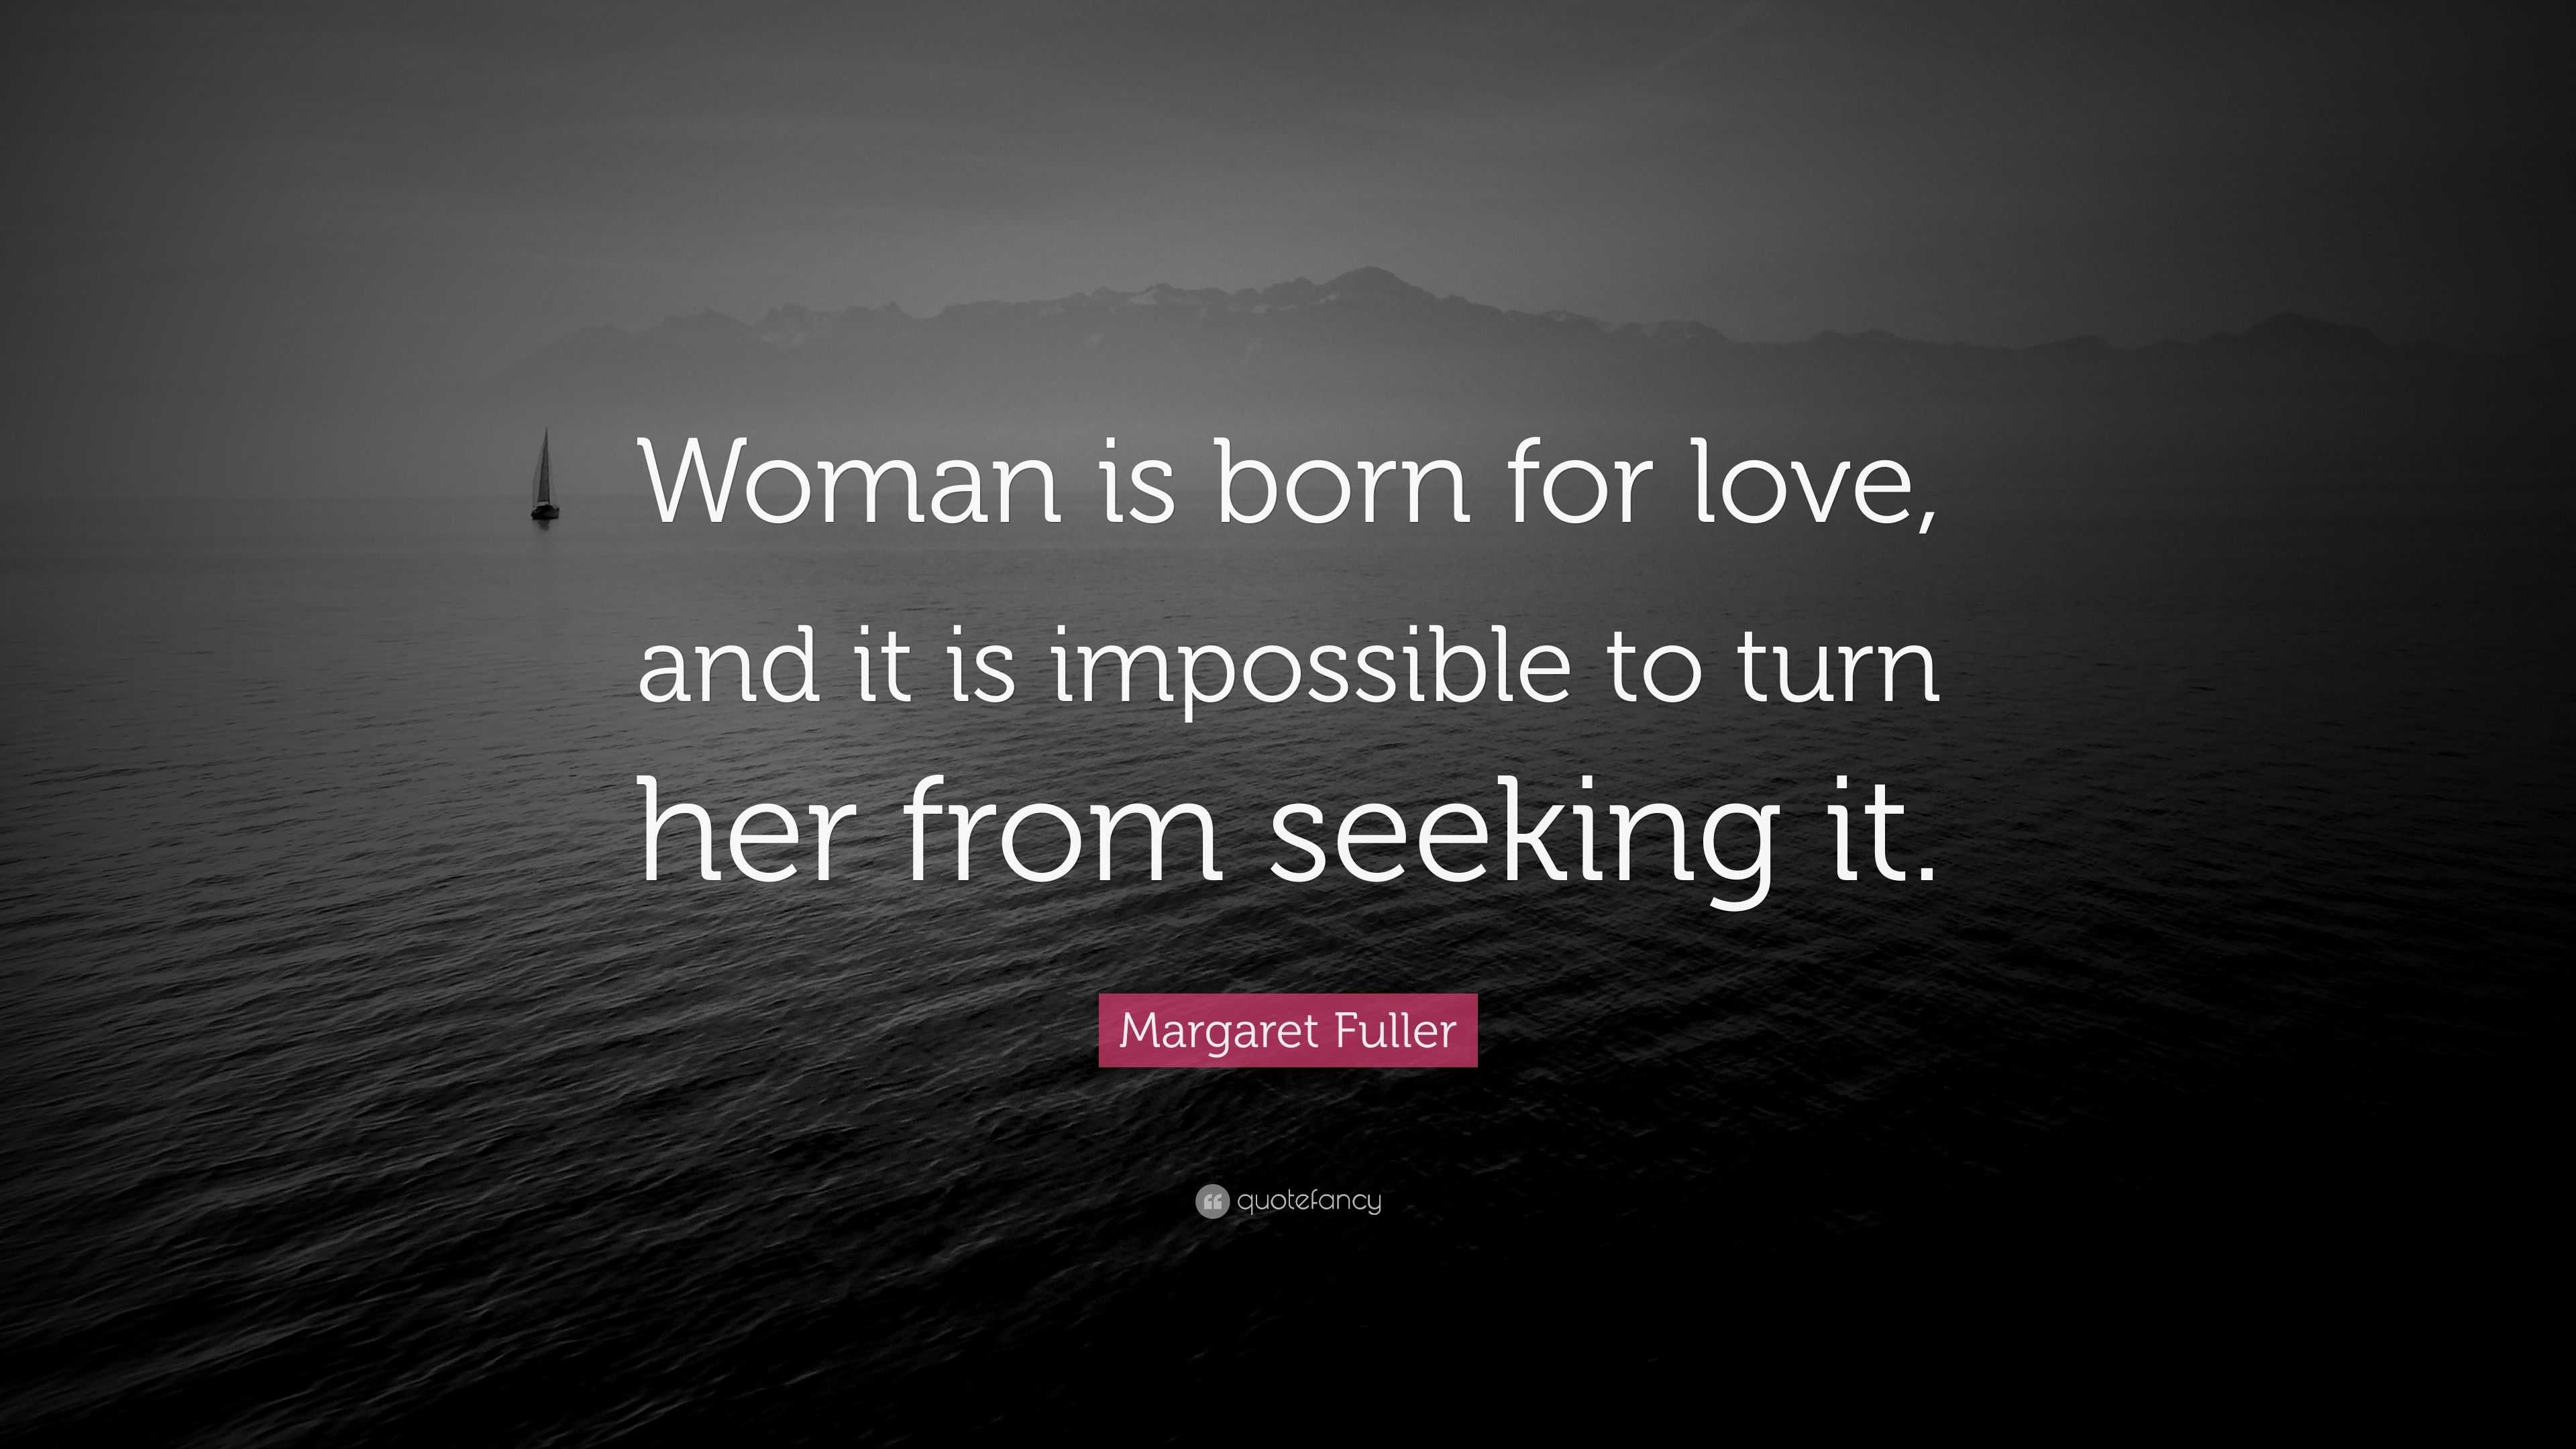 Margaret Fuller Quote: “Woman is born for love, and it is impossible to ...